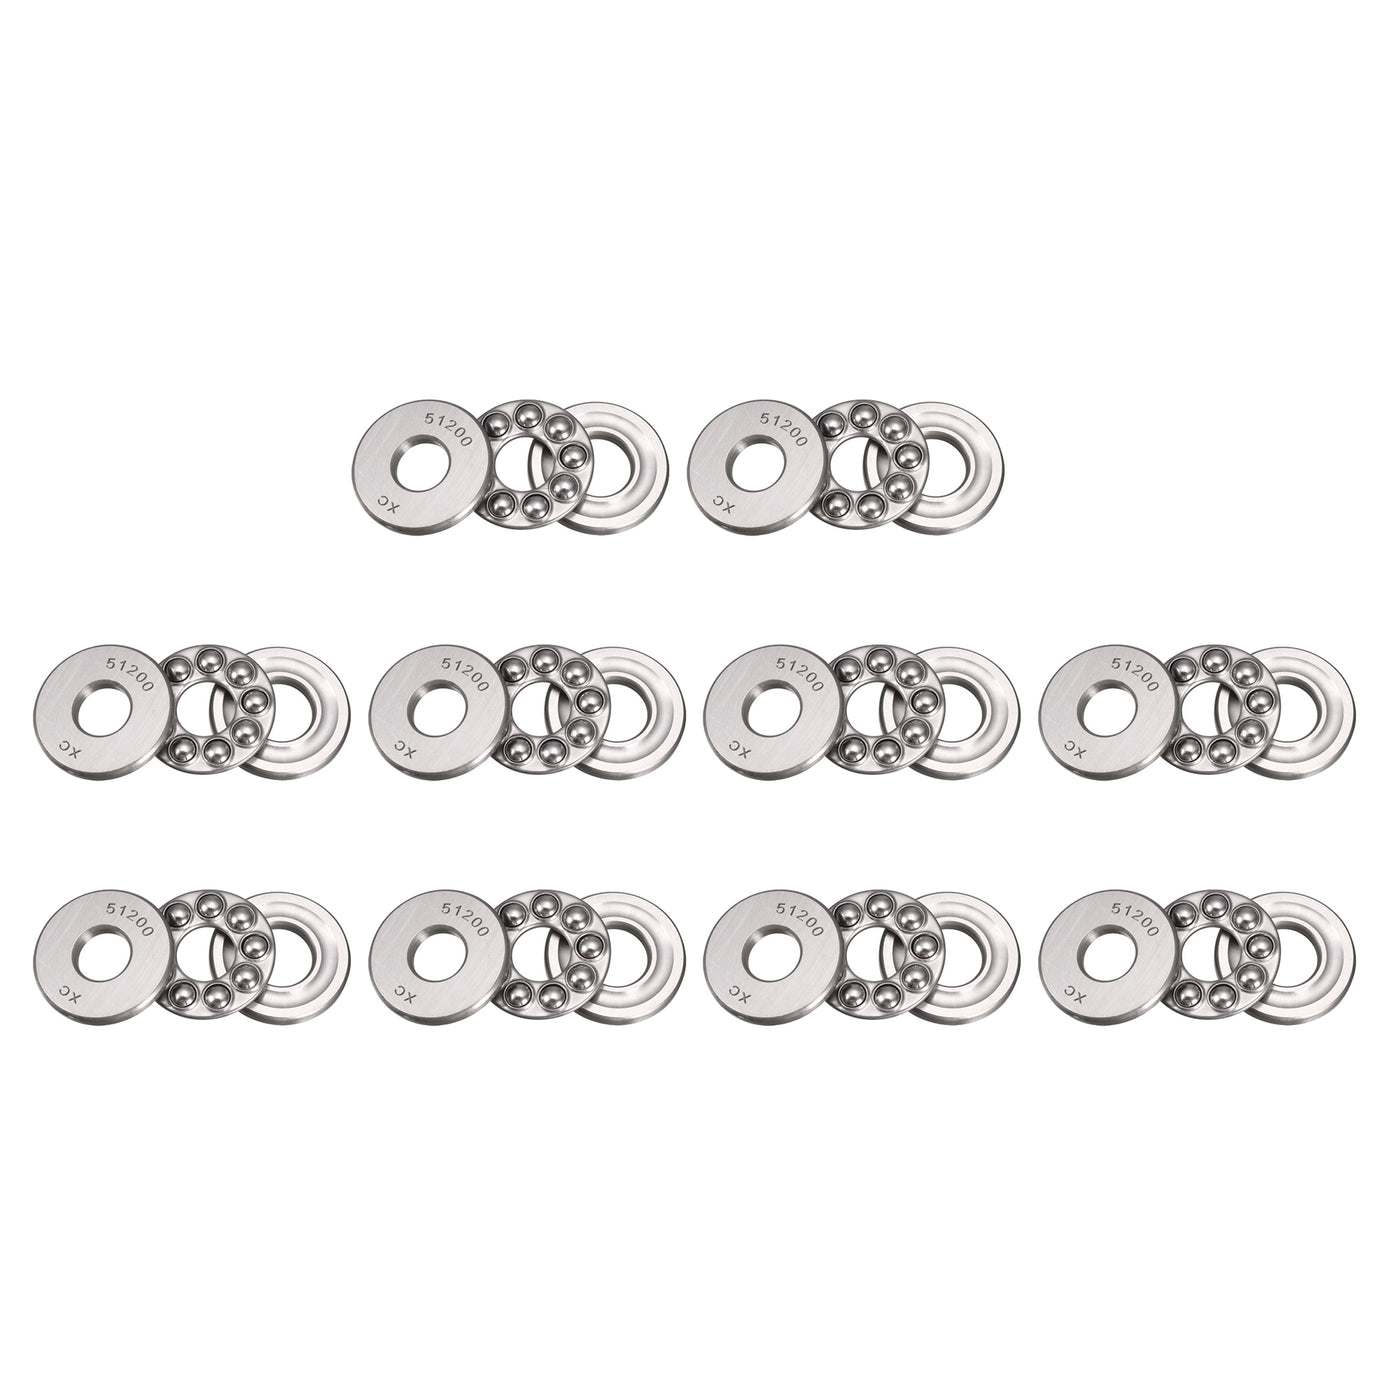 uxcell Uxcell 51200 Miniature Thrust Ball Bearing 10x26x11mm Chrome Steel with Washer 10pcs